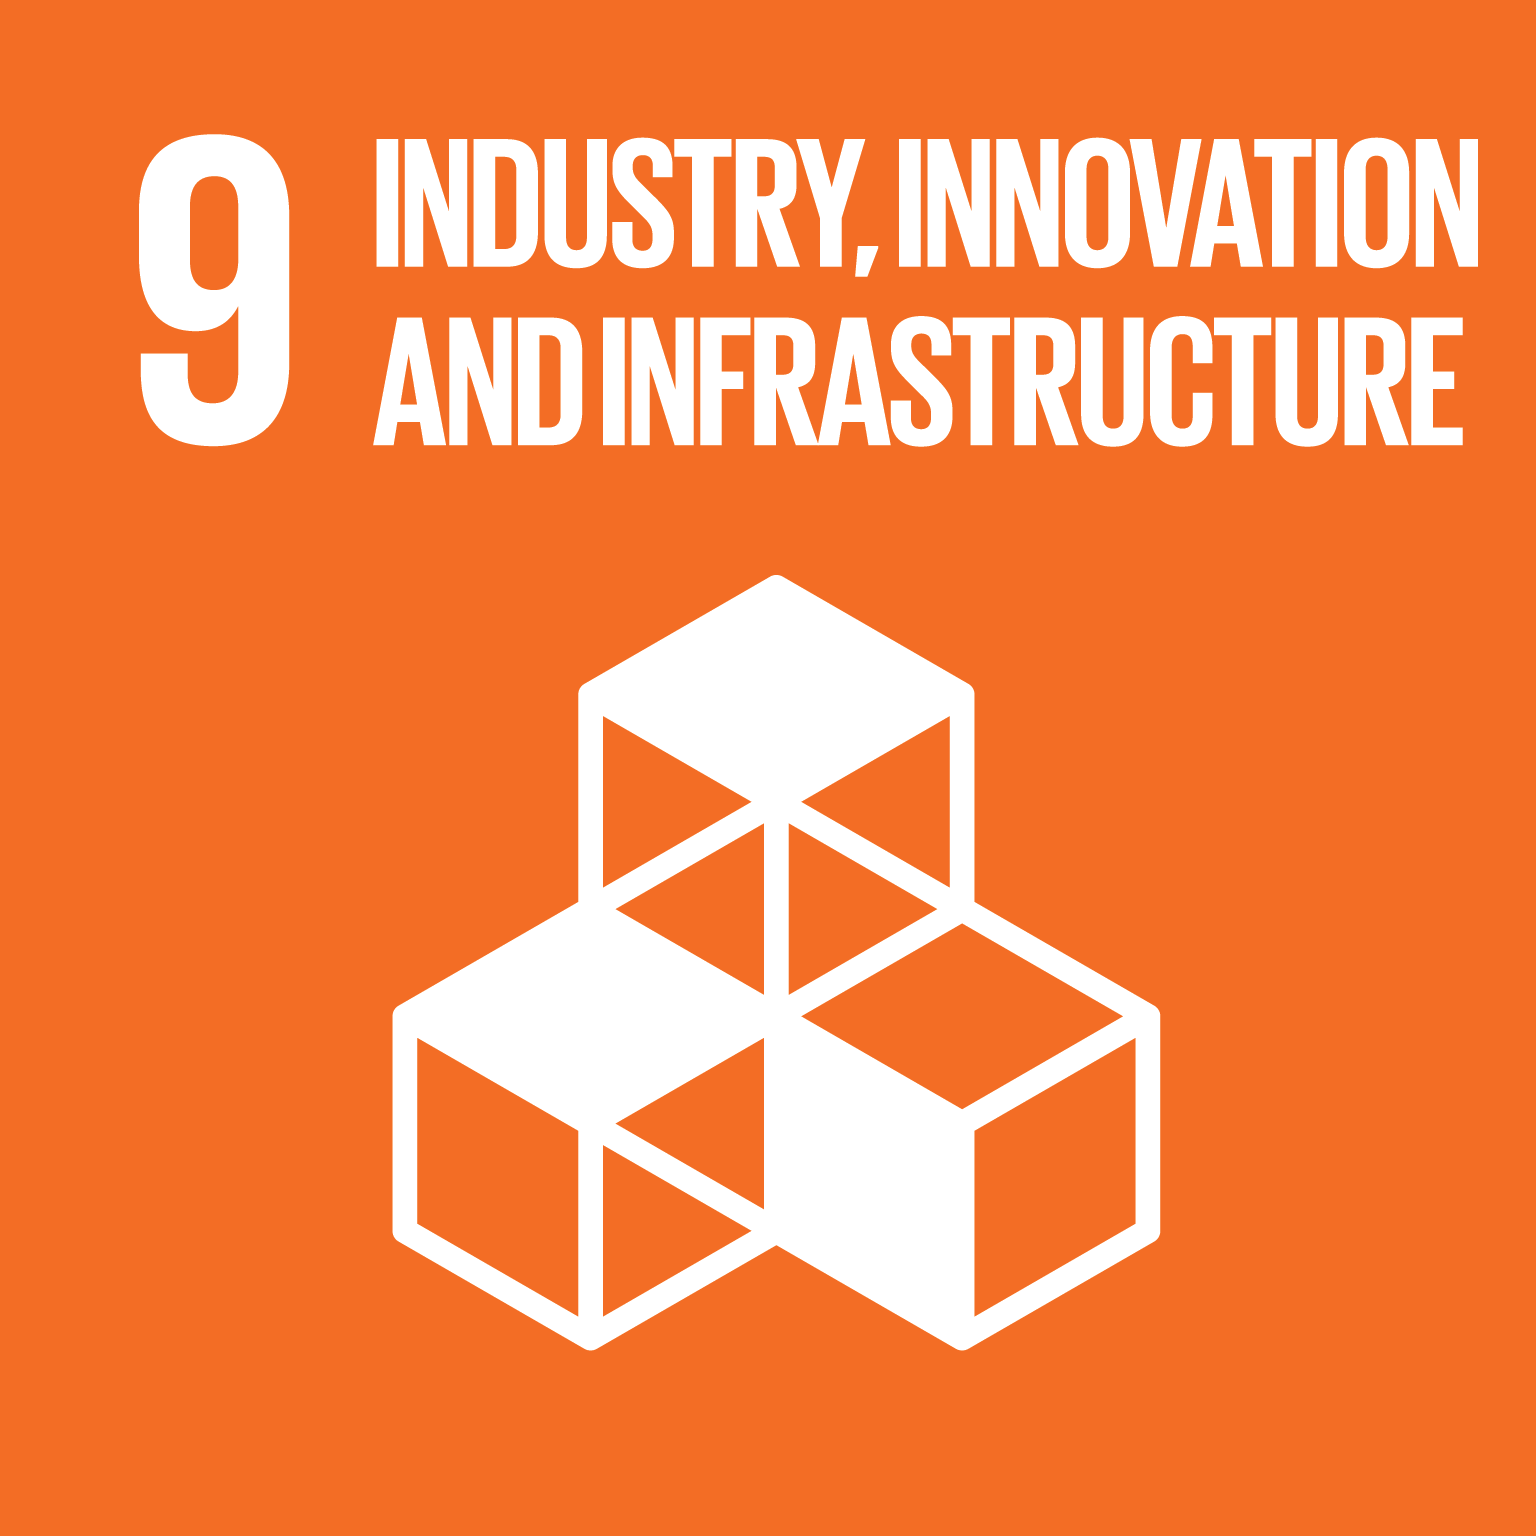 Goal 9 Infrastructure